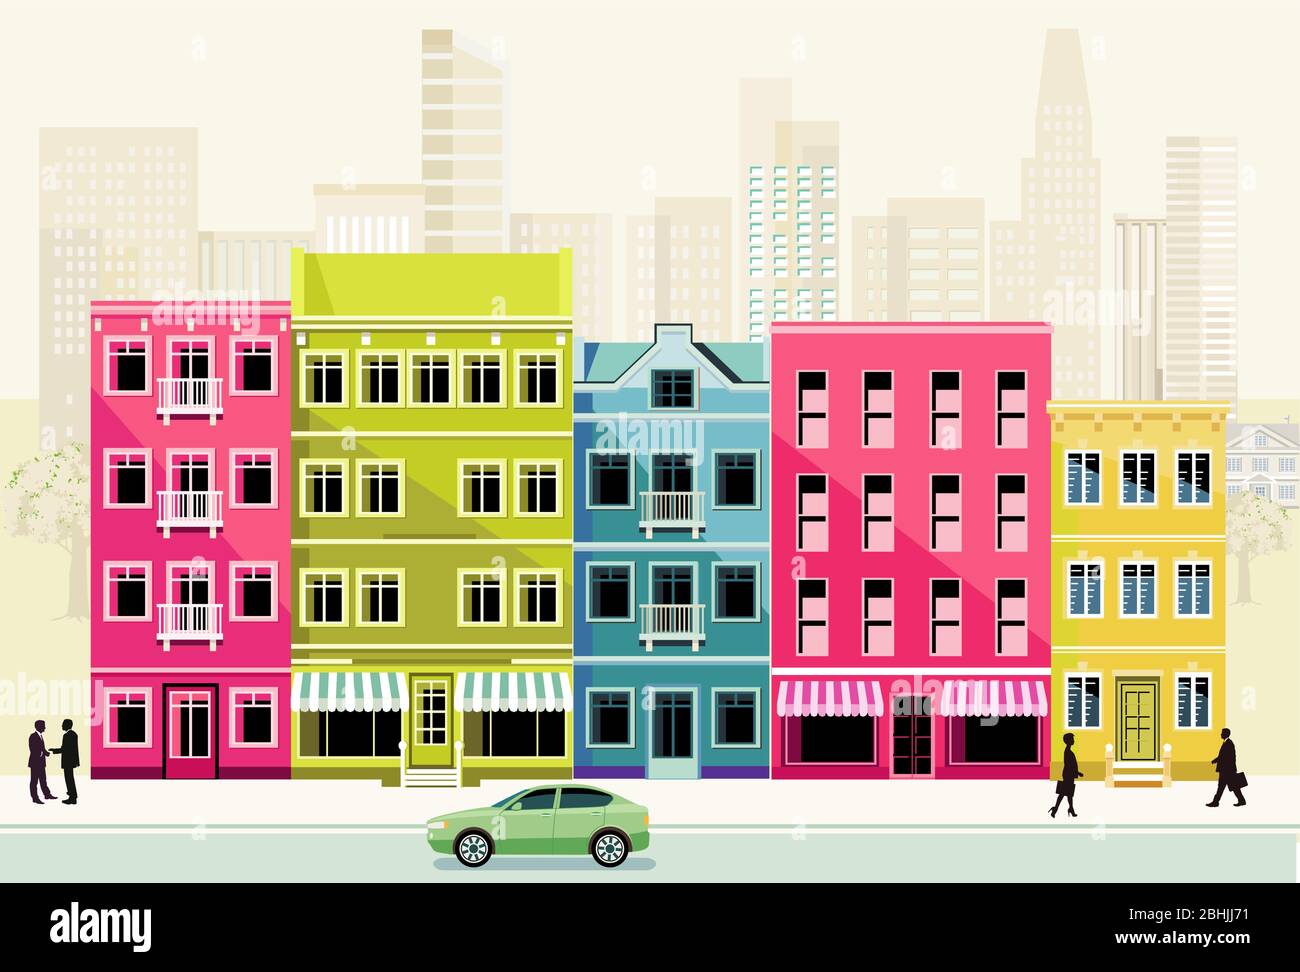 City with colorful houses and pedestrians Stock Vector